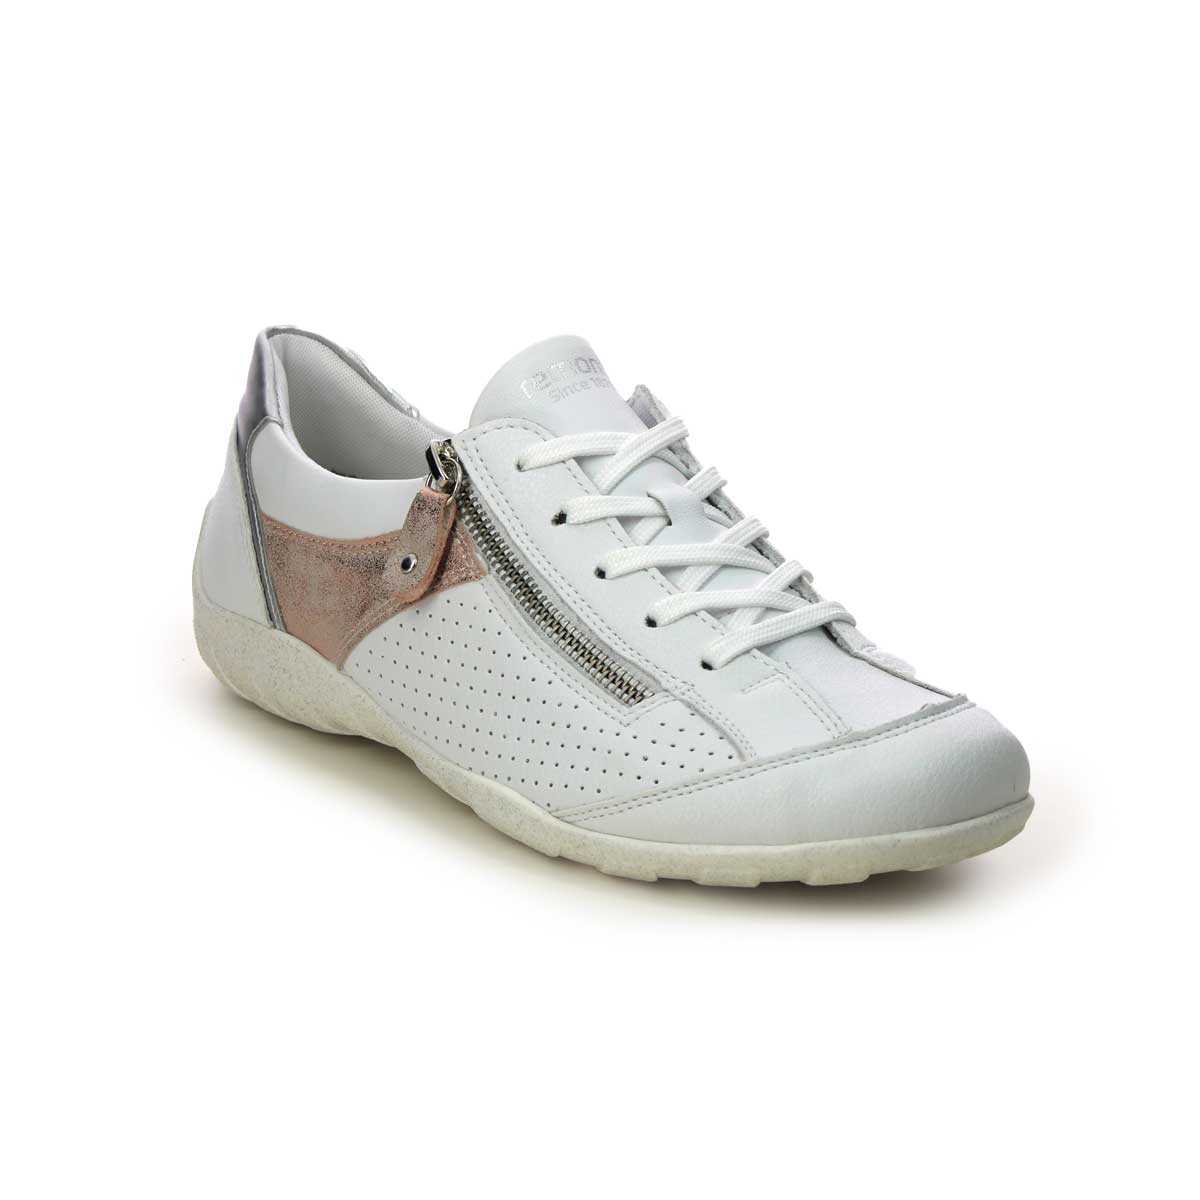 Remonte R3411-81 Livzipa WHITE LEATHER Womens lacing shoes in a Plain Leather in Size 38